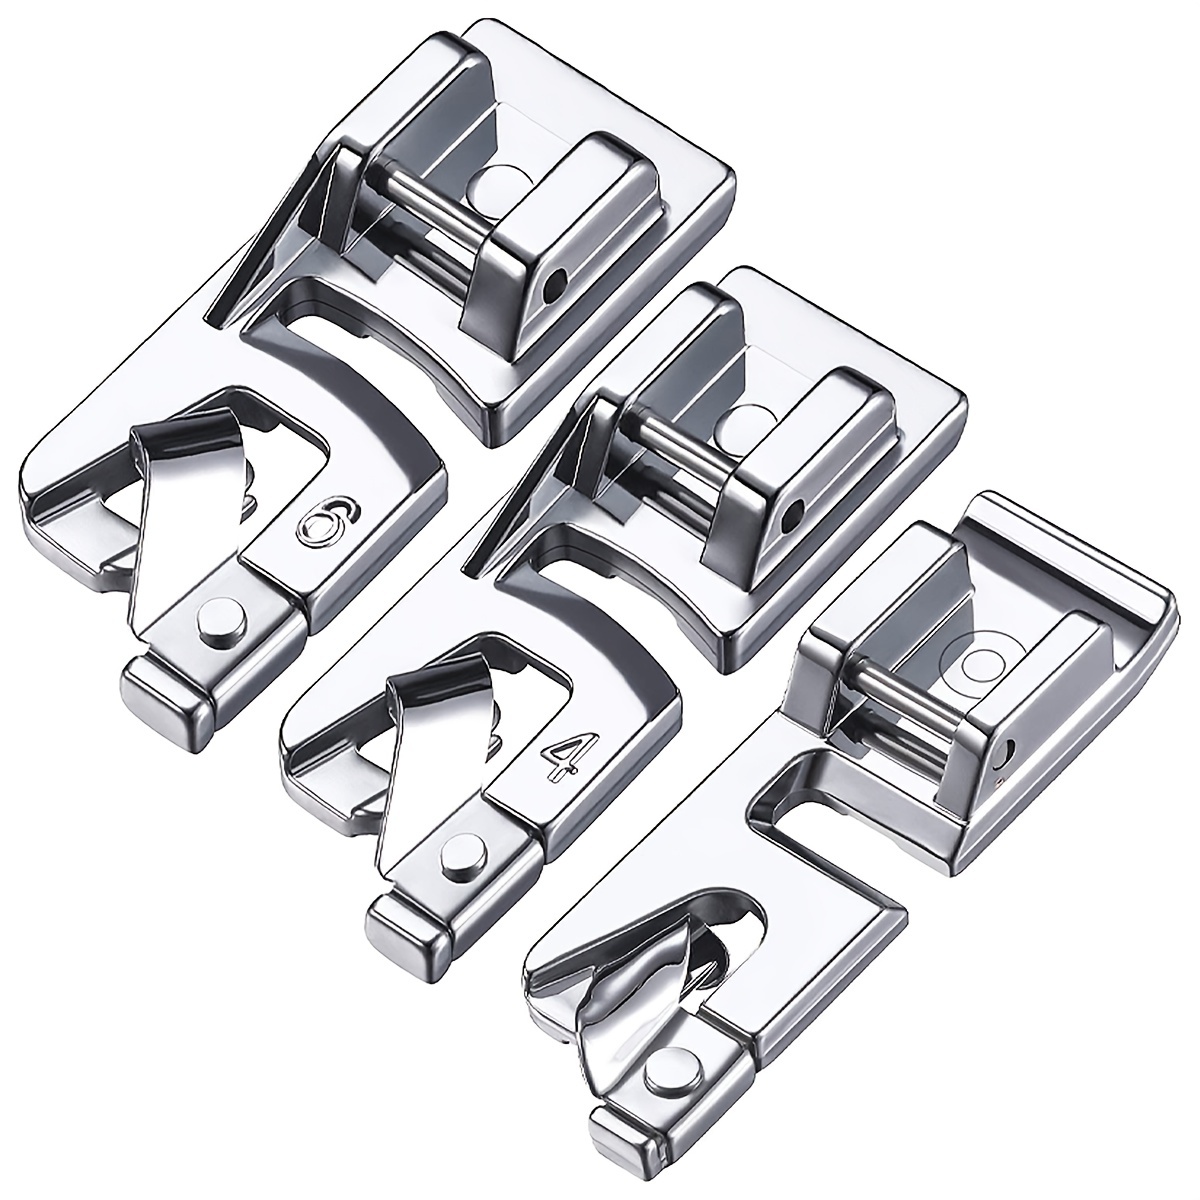 3Pcs Rolled Hem Sewing Machine Presser Foot Hemming Foot Kit For Singer  Brother Janome Home Sewing Rolled Hemmer Presser Foot